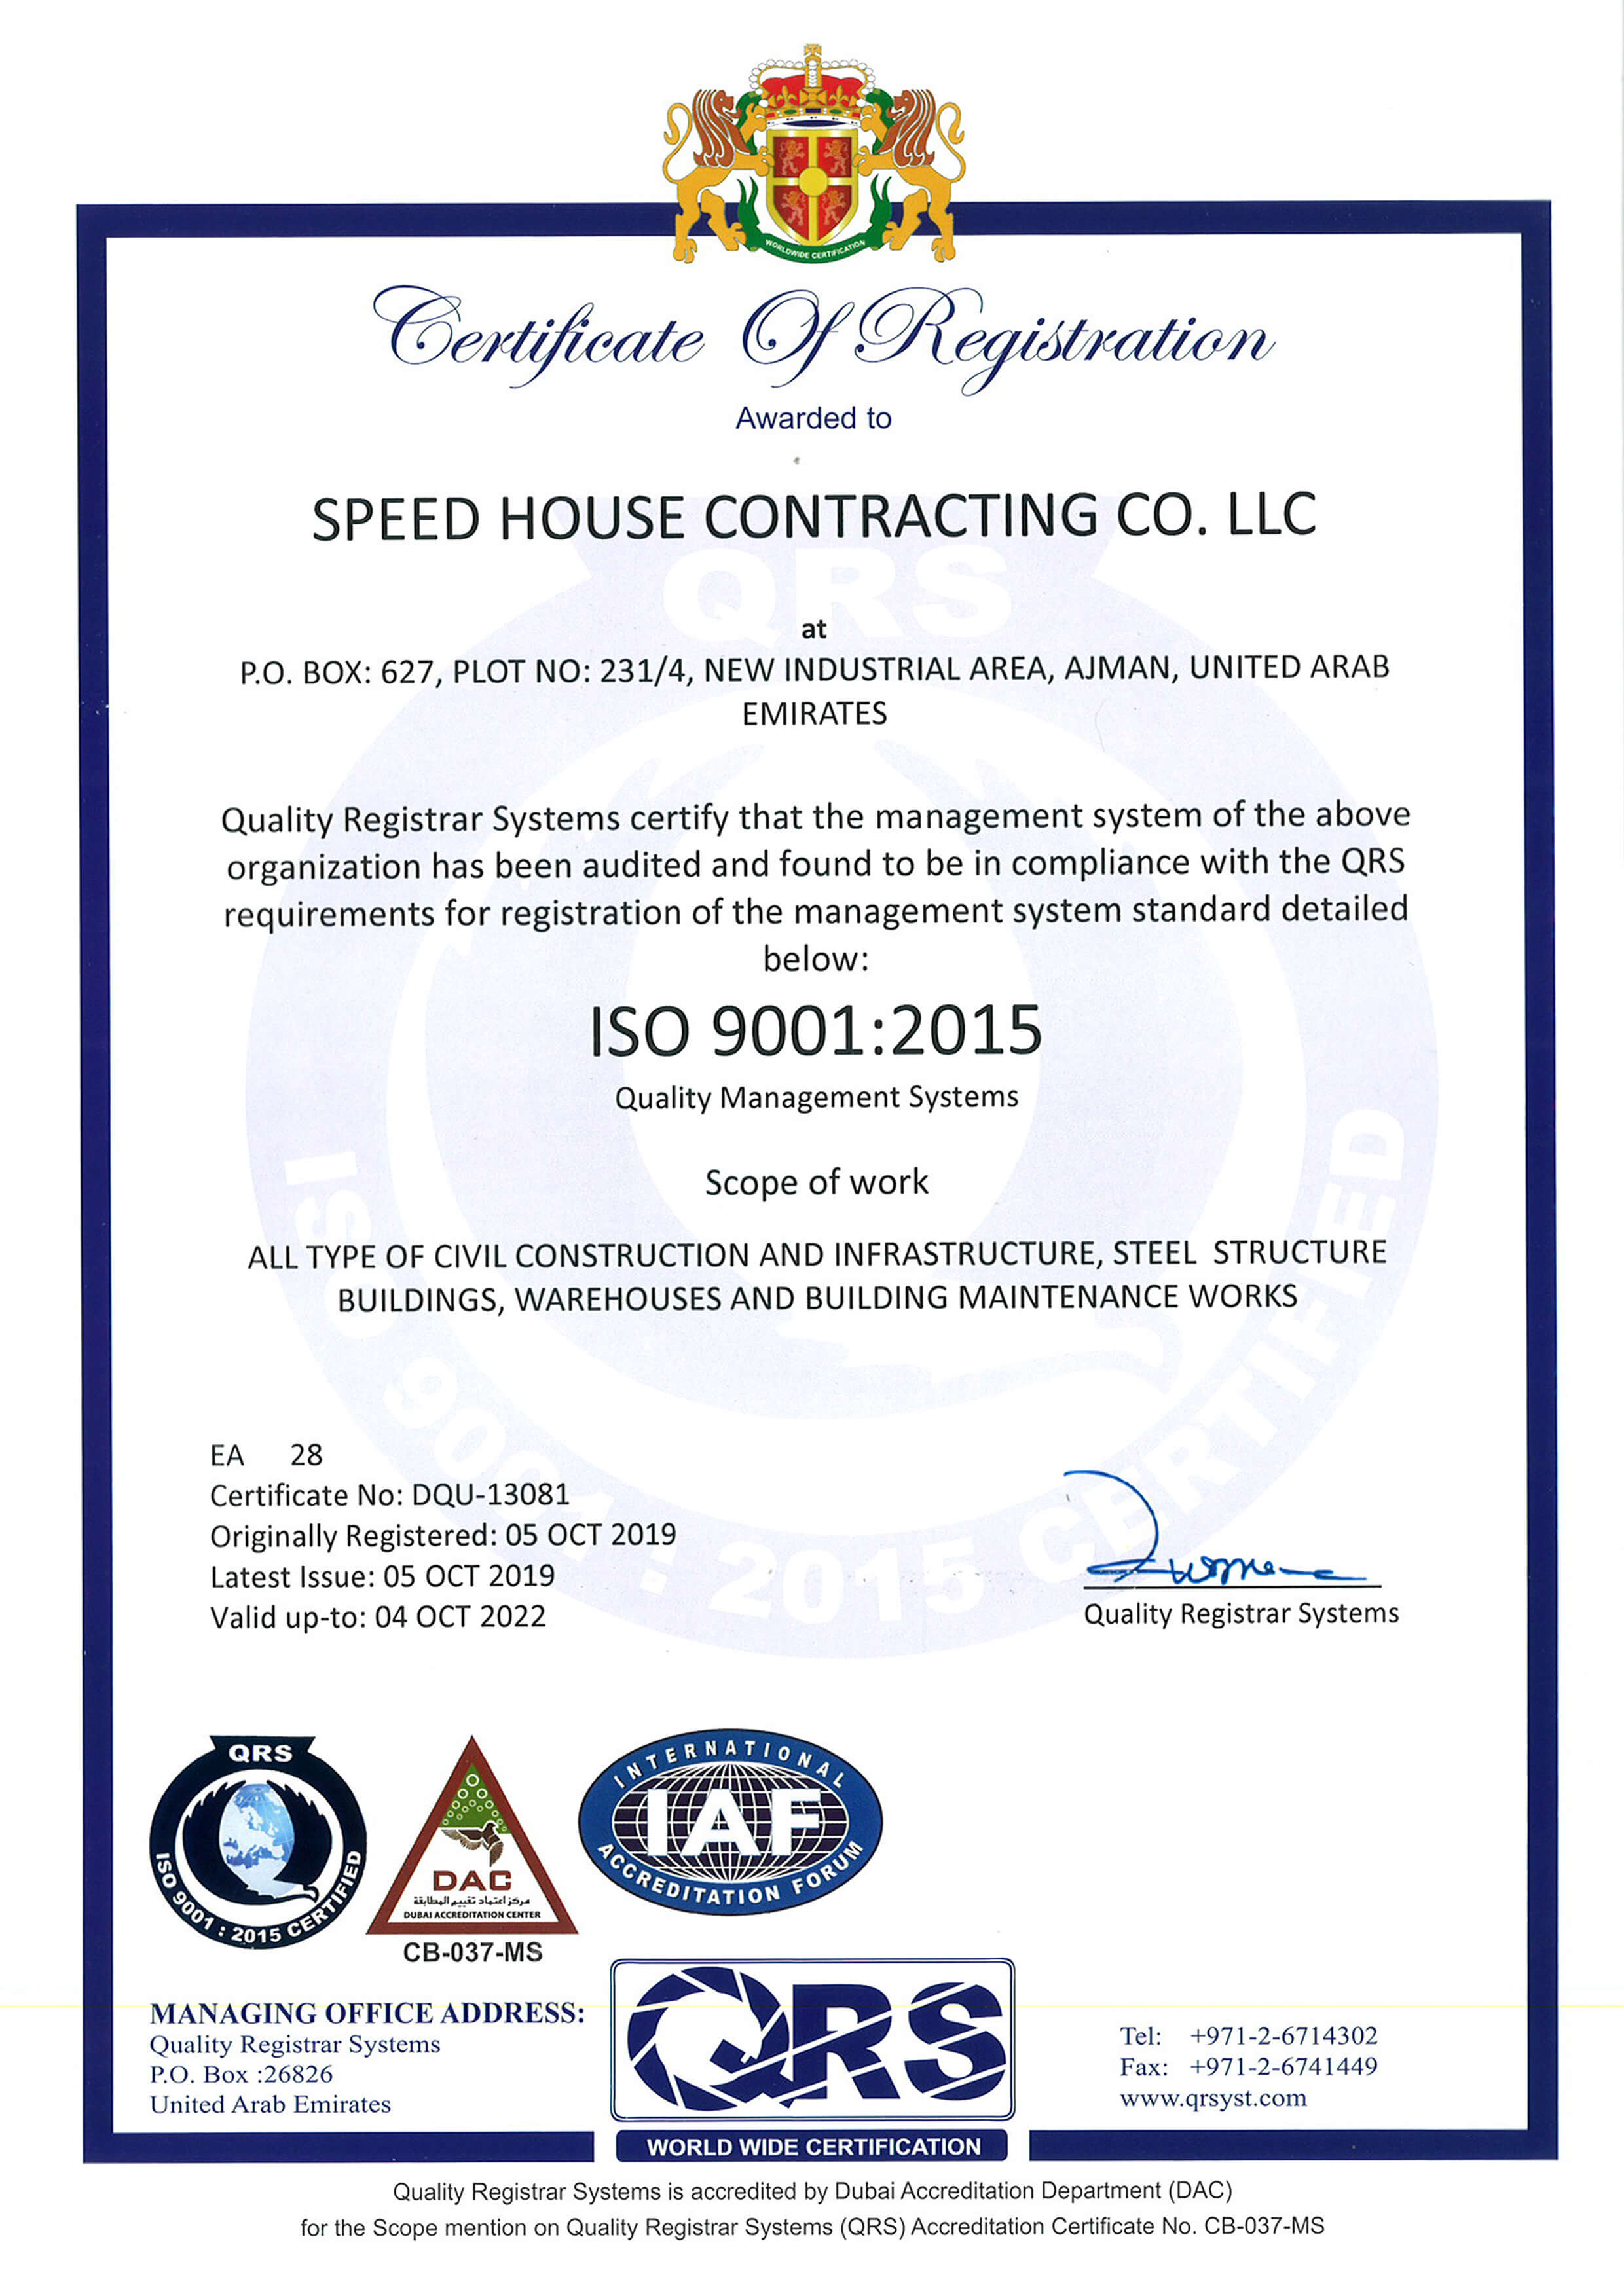 Speed House Group Contracting ISO 9001 Certificate